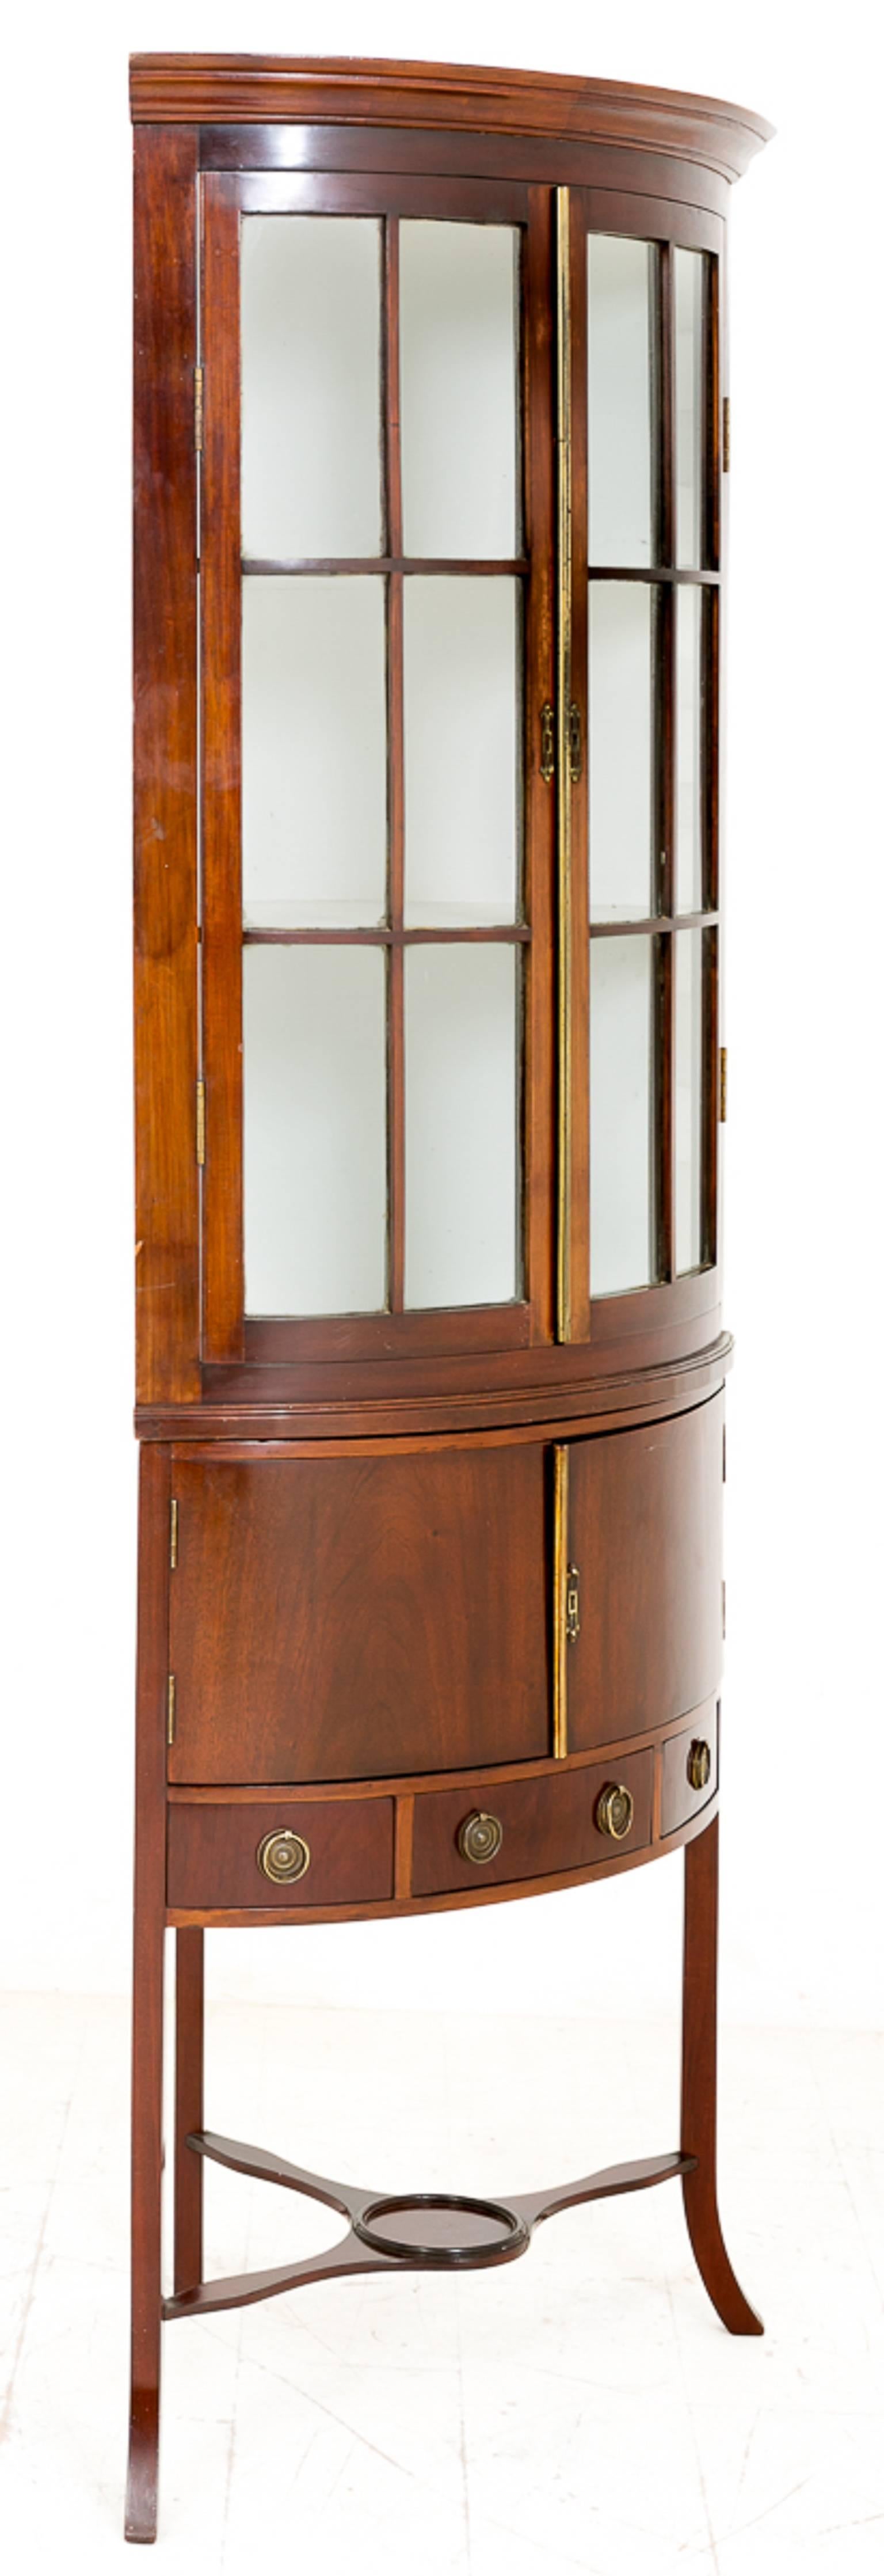 Mahogany Corner Cabinet with Georgian Influences In Good Condition For Sale In Norwich, Norfolk